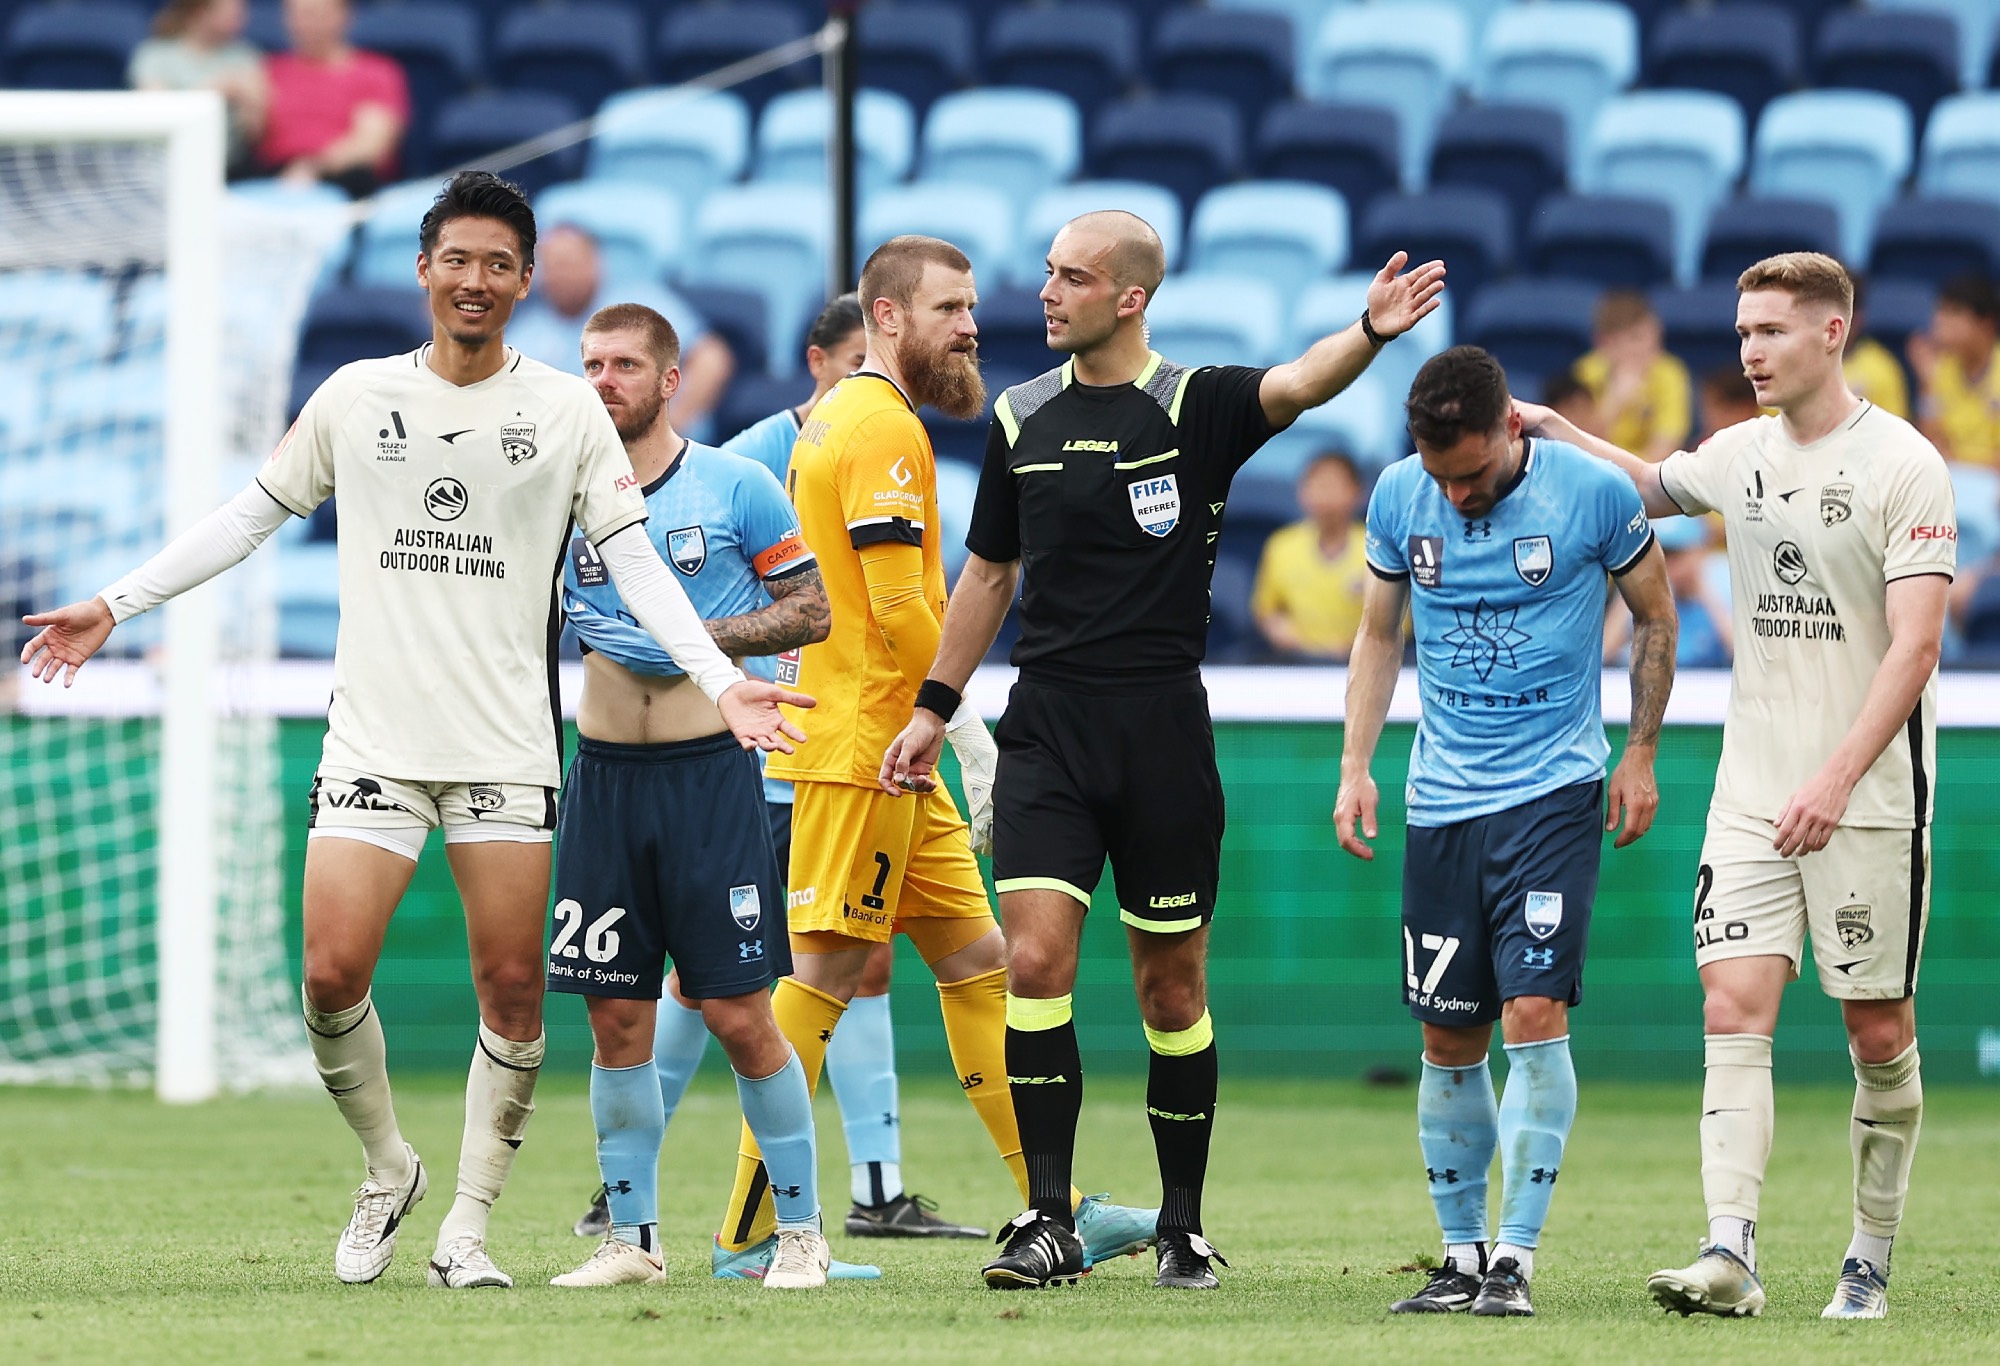 Hiroshi Ibusuki of United is given a red card by referee Daniel Elder during the round three A-League Men's match between Sydney FC and Adelaide United at Allianz Stadium, on October 23, 2022, in Sydney, Australia. (Photo by Matt King/Getty Images)